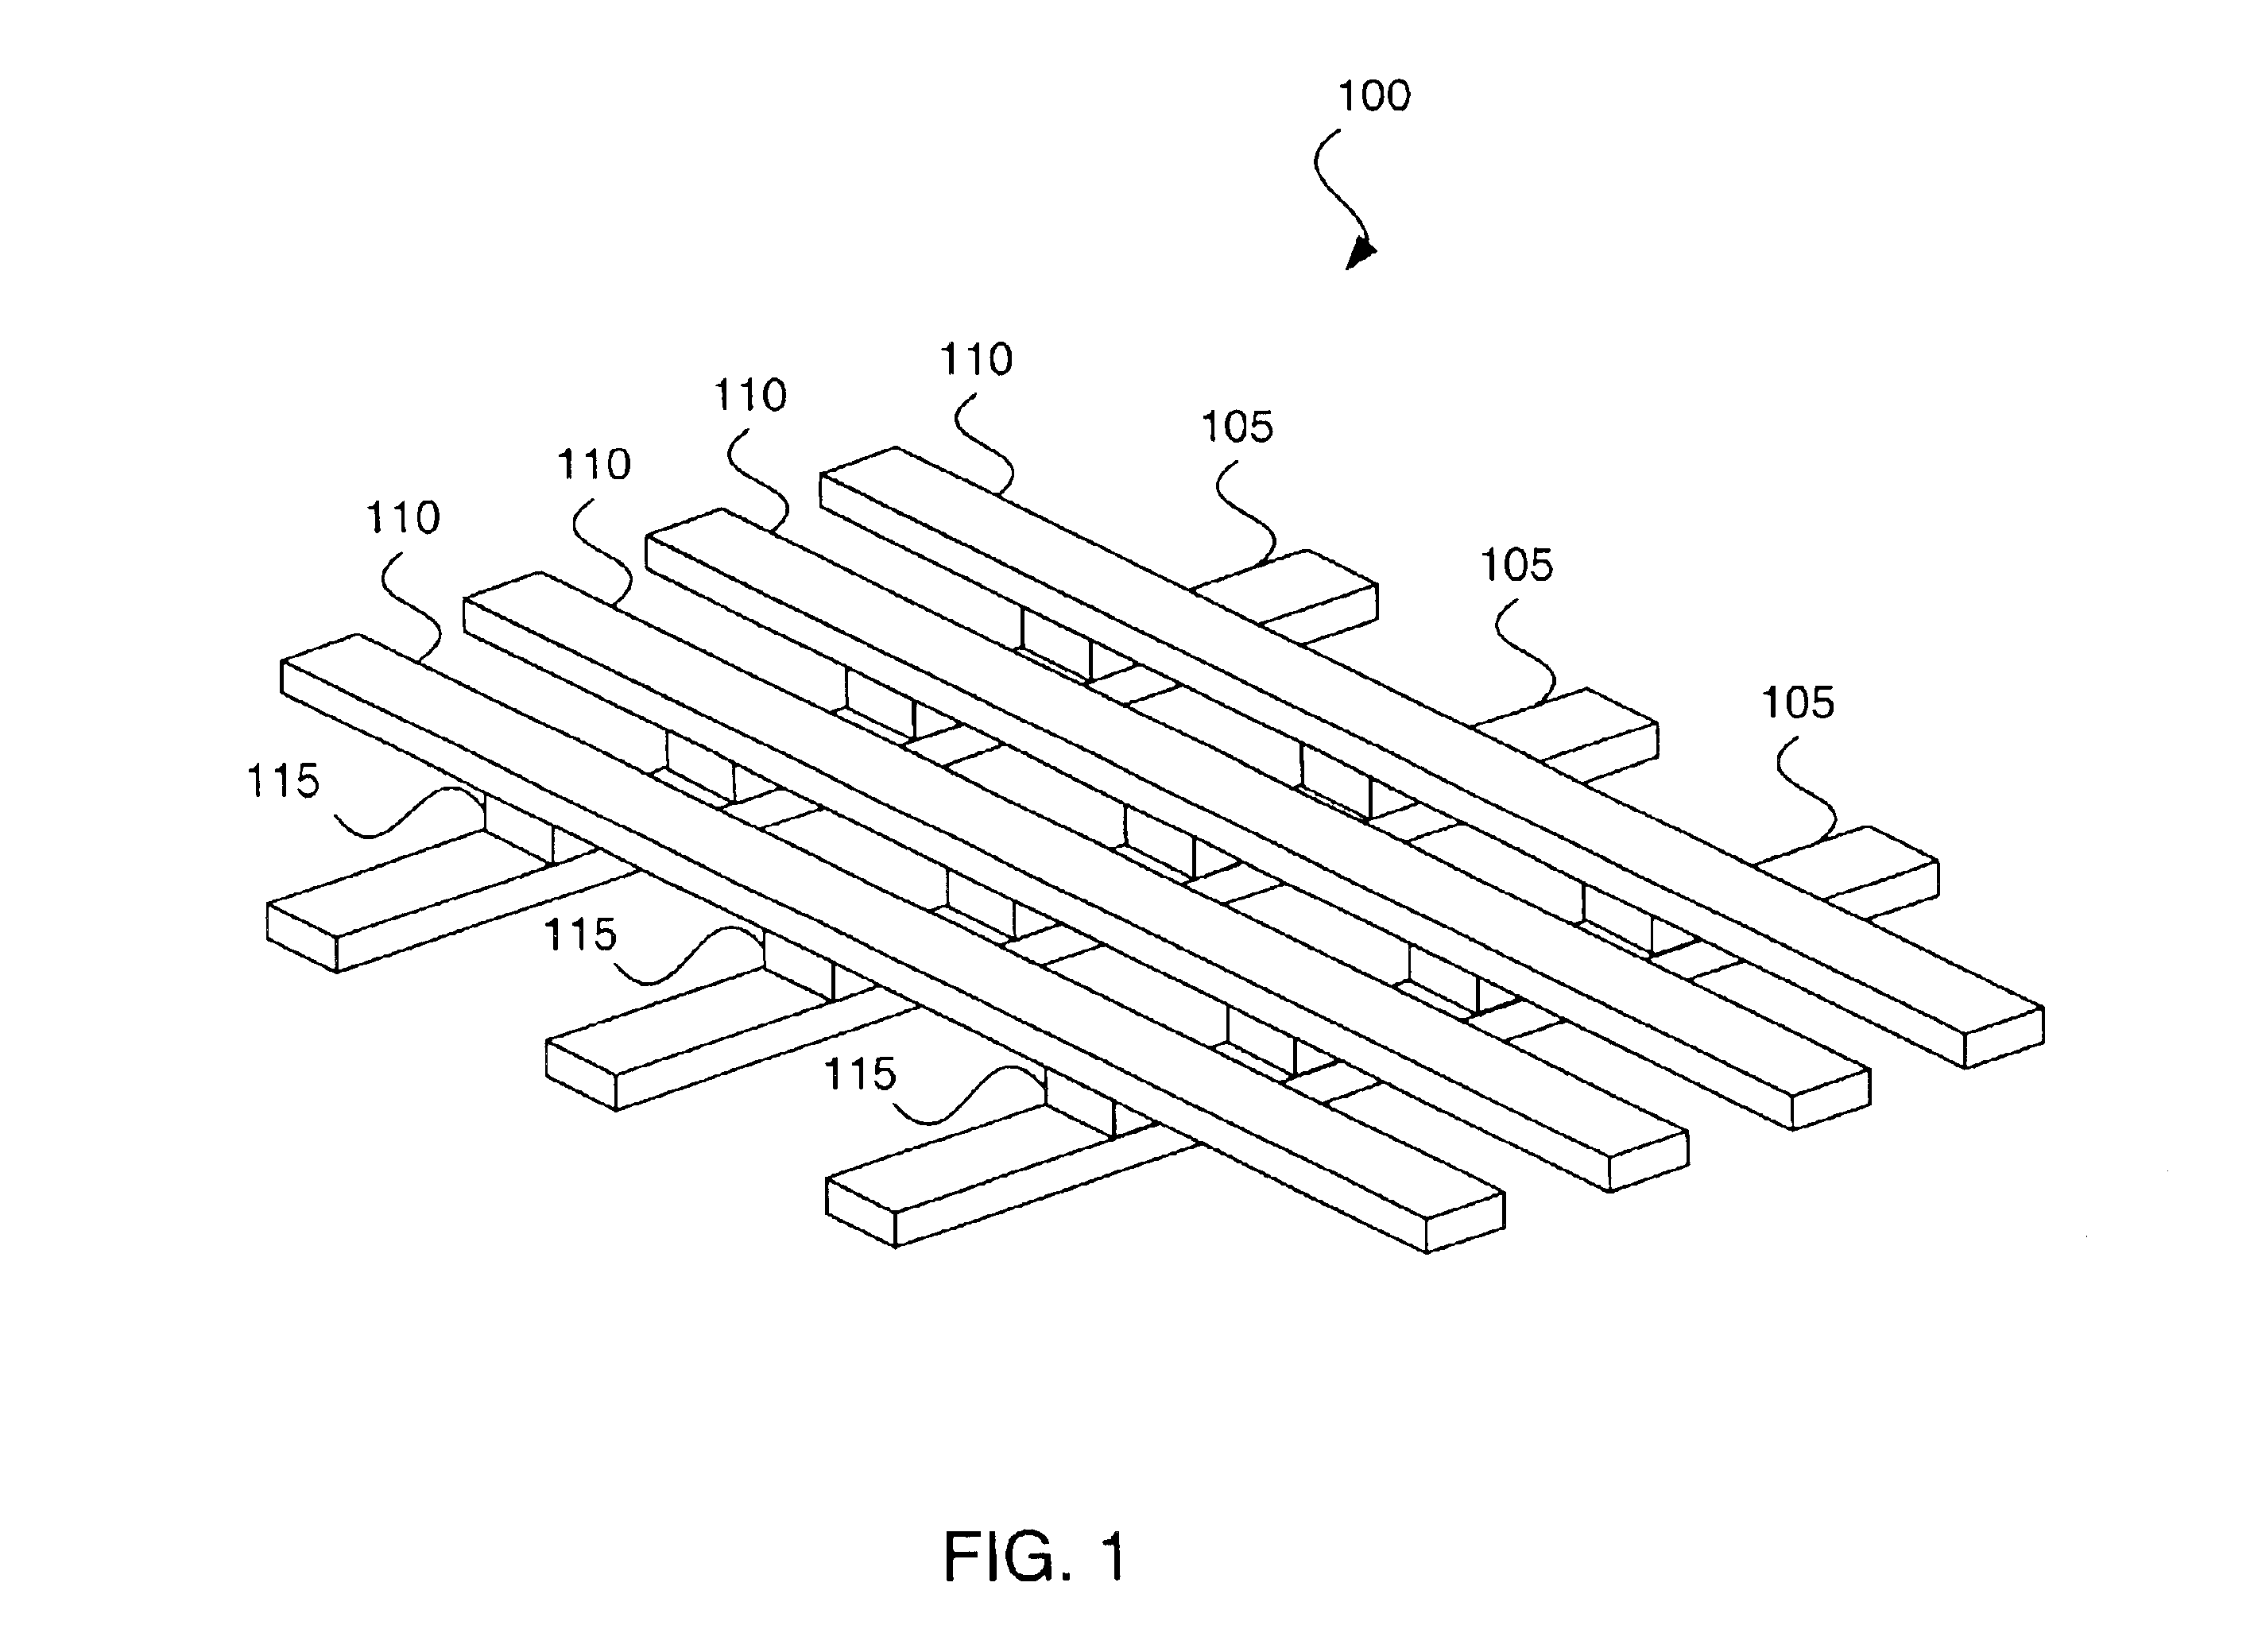 Cross point memory array with memory plugs exhibiting a characteristic hysteresis